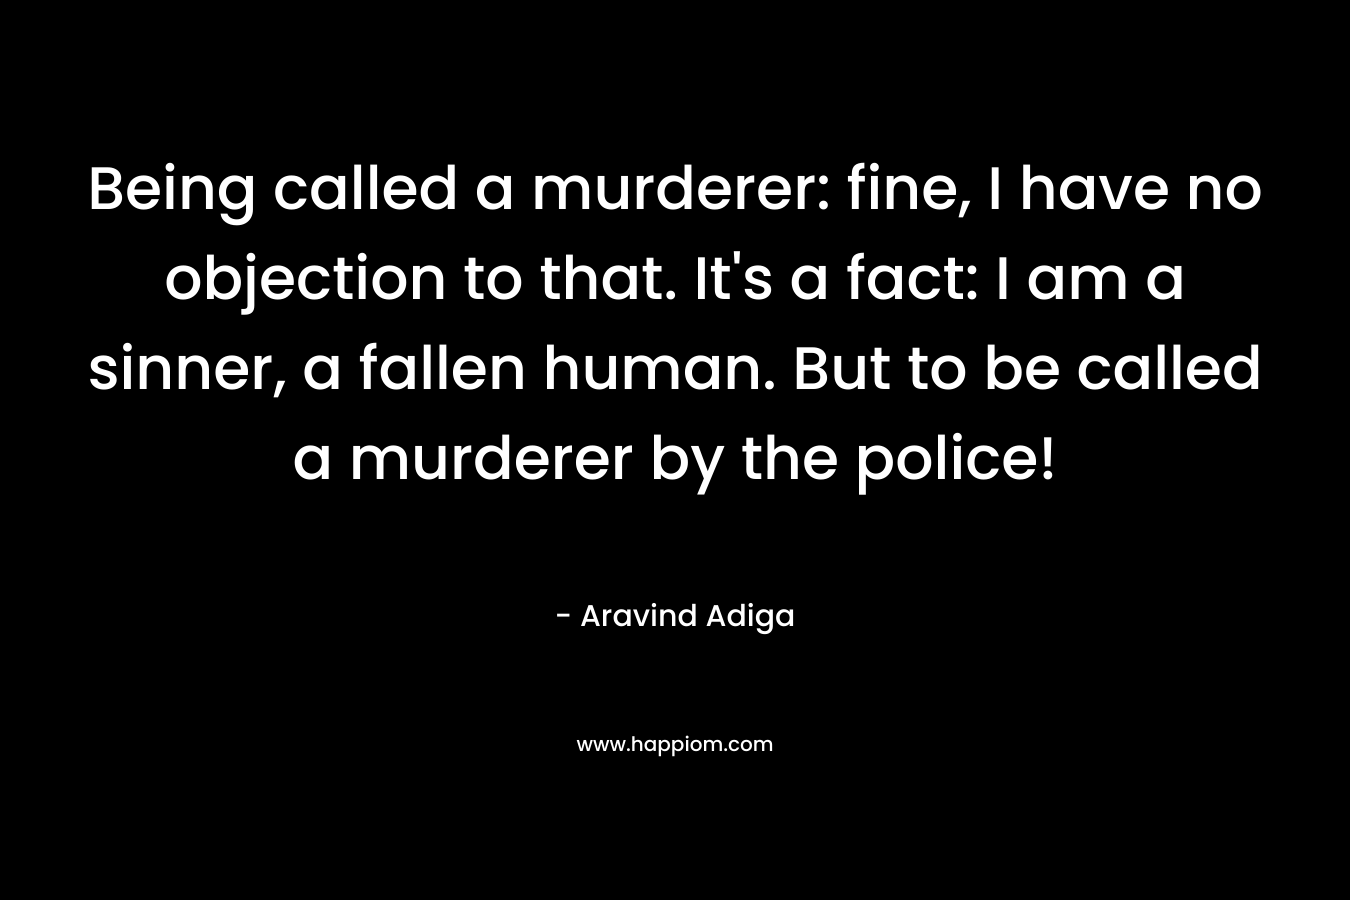 Being called a murderer: fine, I have no objection to that. It’s a fact: I am a sinner, a fallen human. But to be called a murderer by the police! – Aravind Adiga